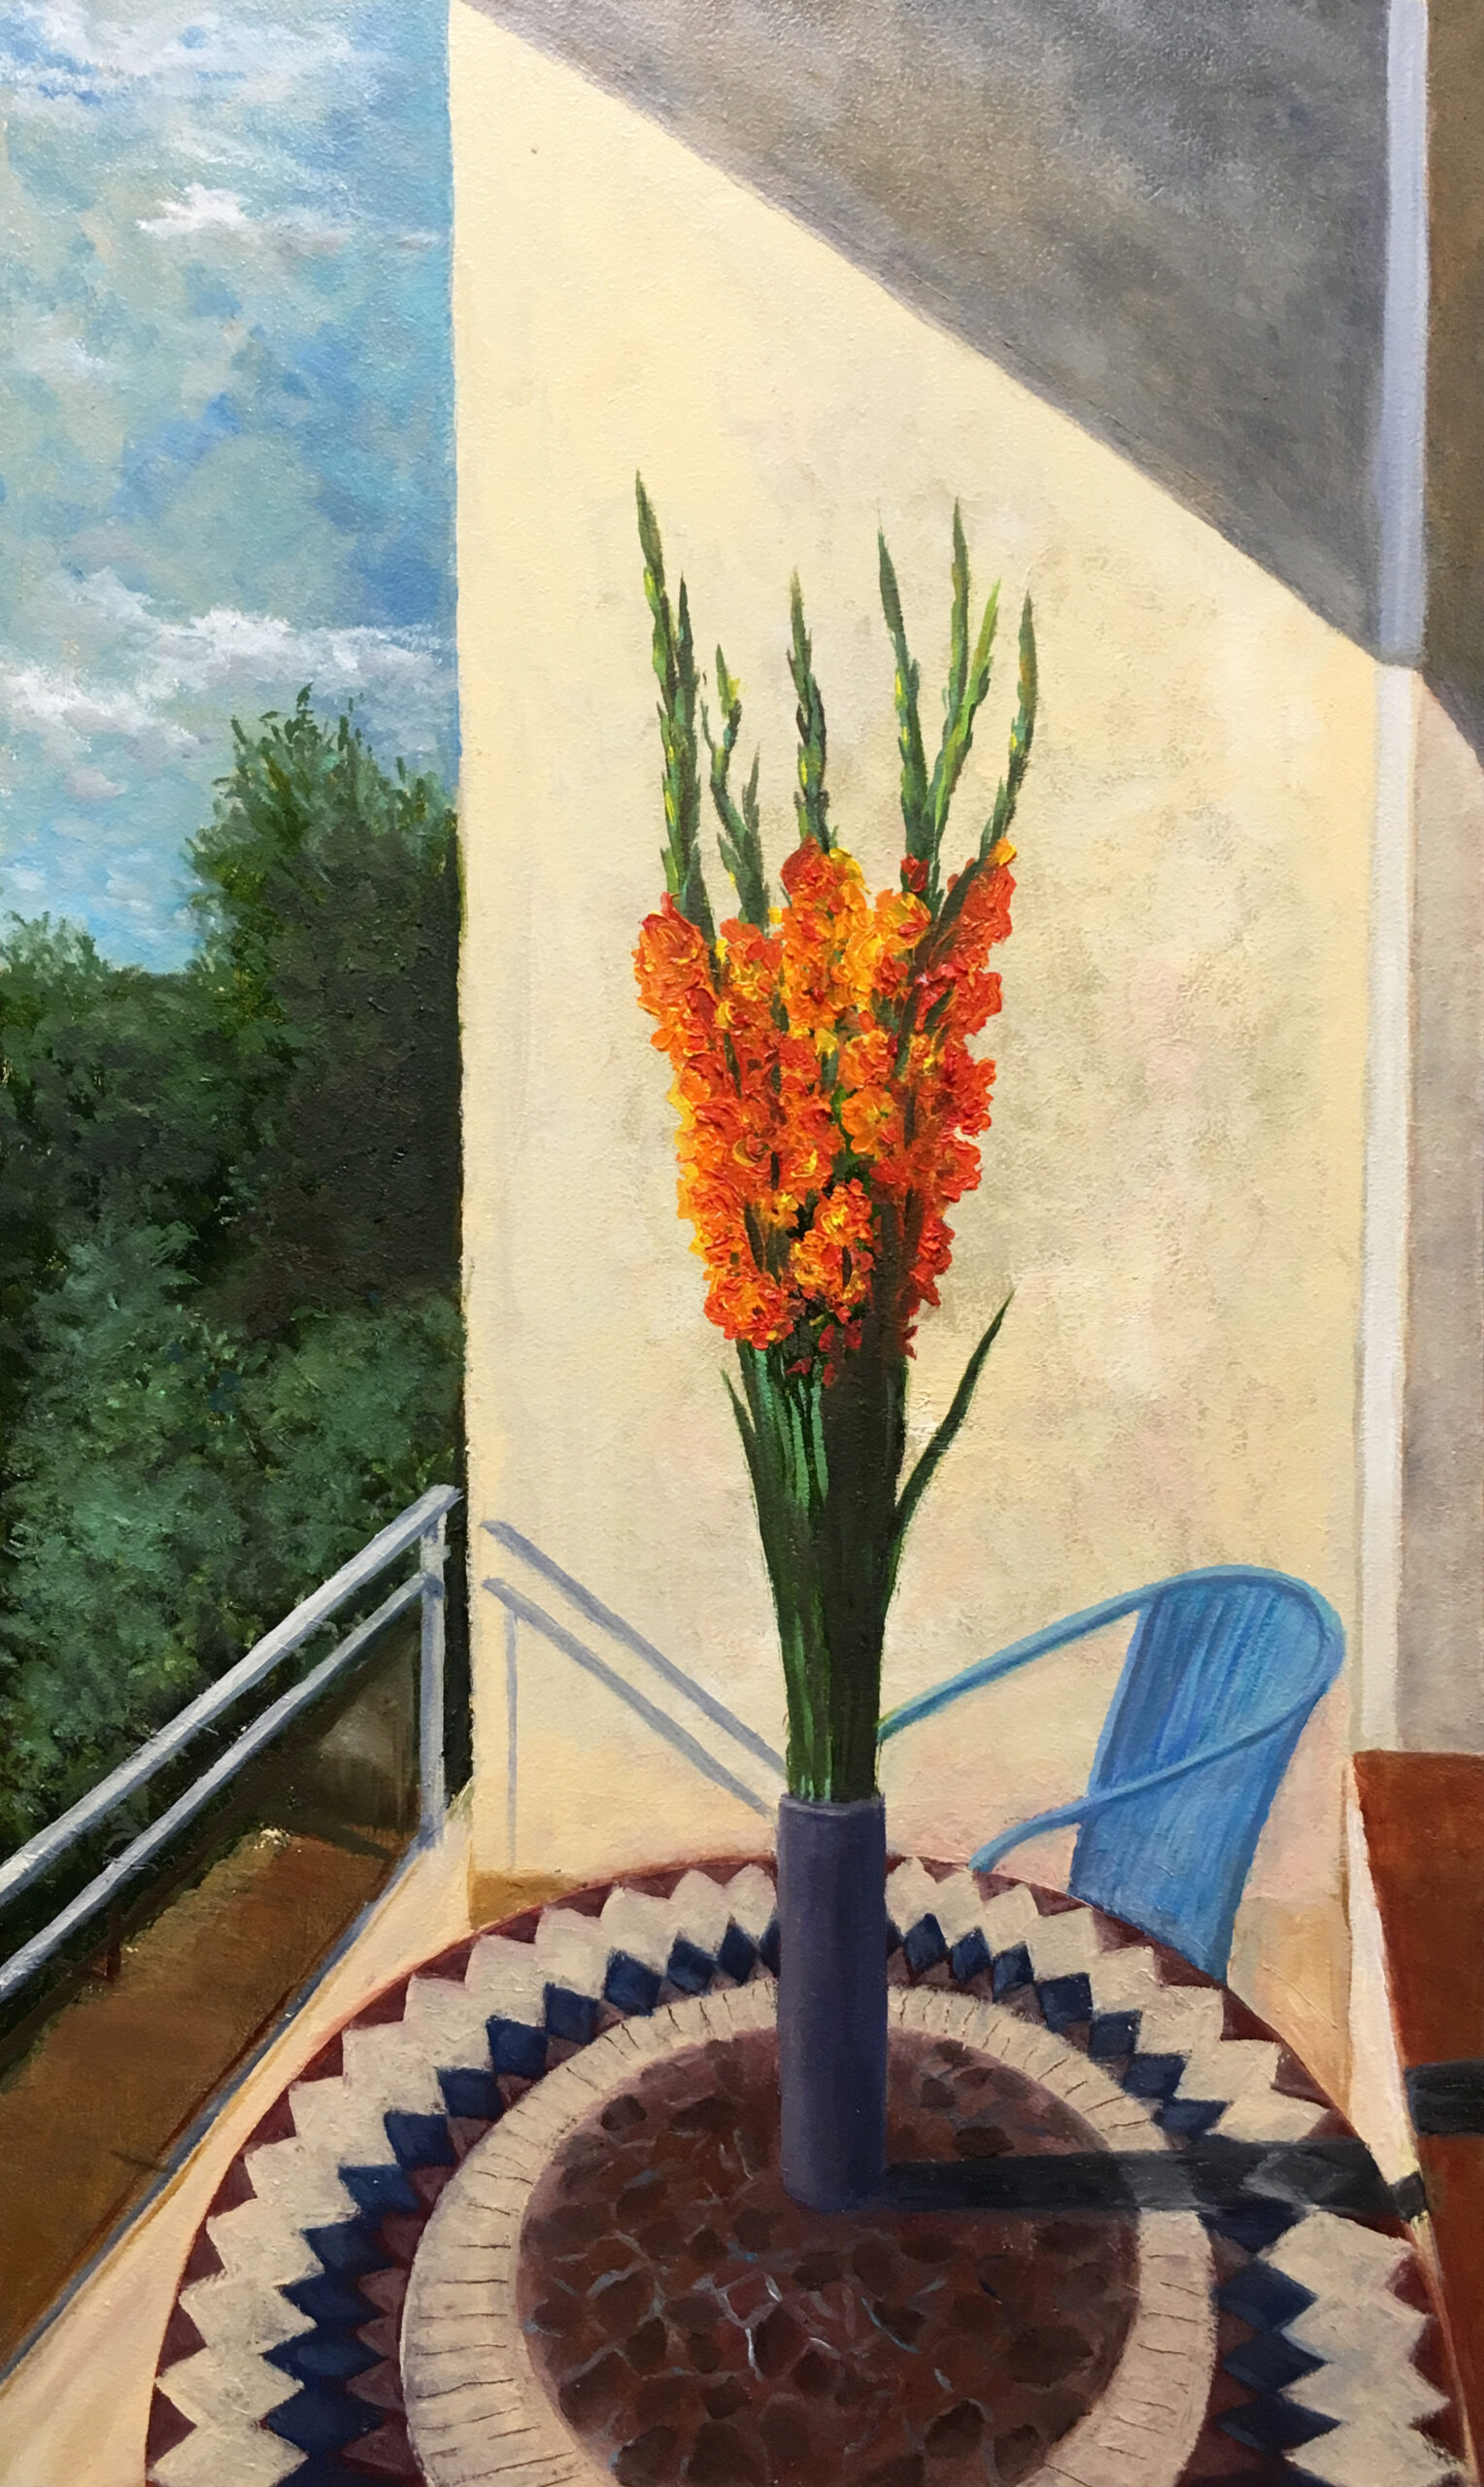 Gladioluses on the balcony - SOLD